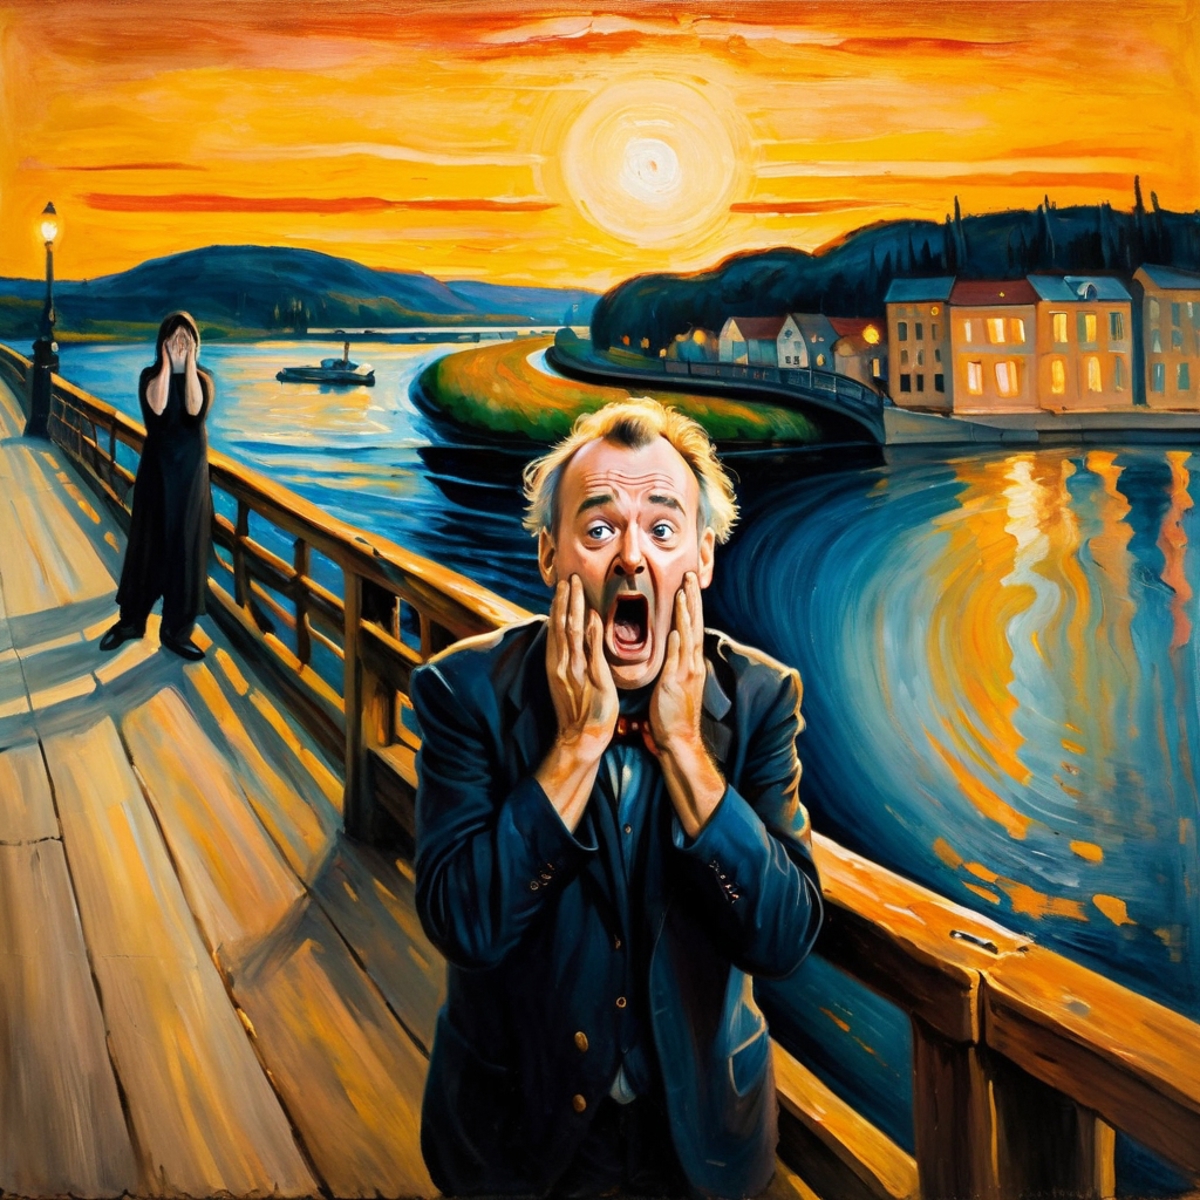 A painting of a man yelling with a red sun in the background.